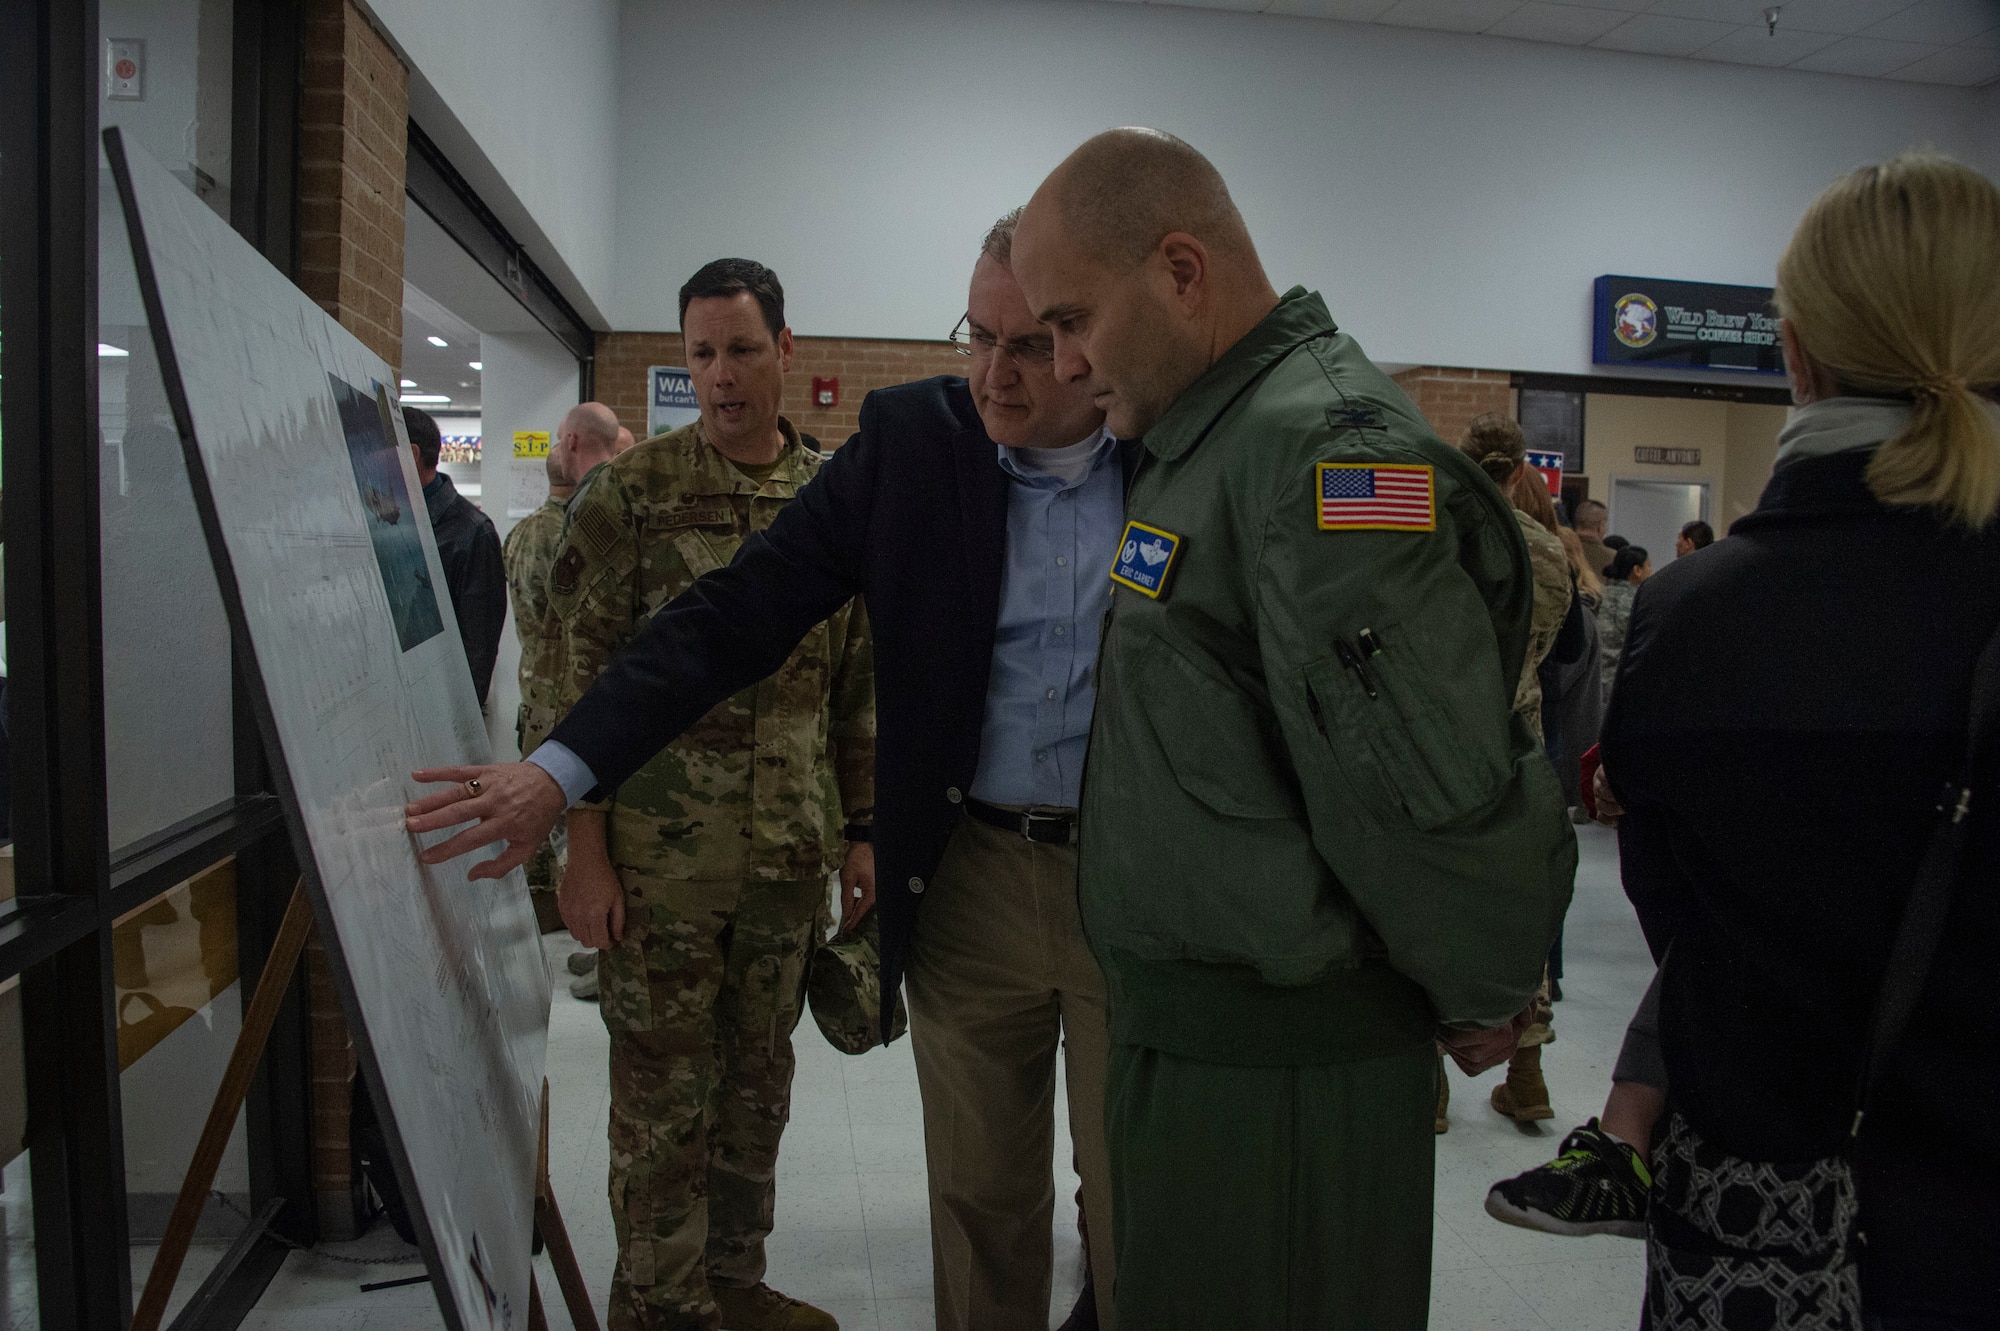 Don Walter Jr., Exchange general manager for Fort Sill, Okla./Sheppard Air Force Base/Altus AFB, shows U.S. Air Force Col. Eric Carney, 97th Air Mobility Wing commander and Col. Robert Pedersen, 97th Mission Support Group commander the expansion plans for the Base Exchange, Feb. 29, 2019 at Altus Air Force Base, Okla.